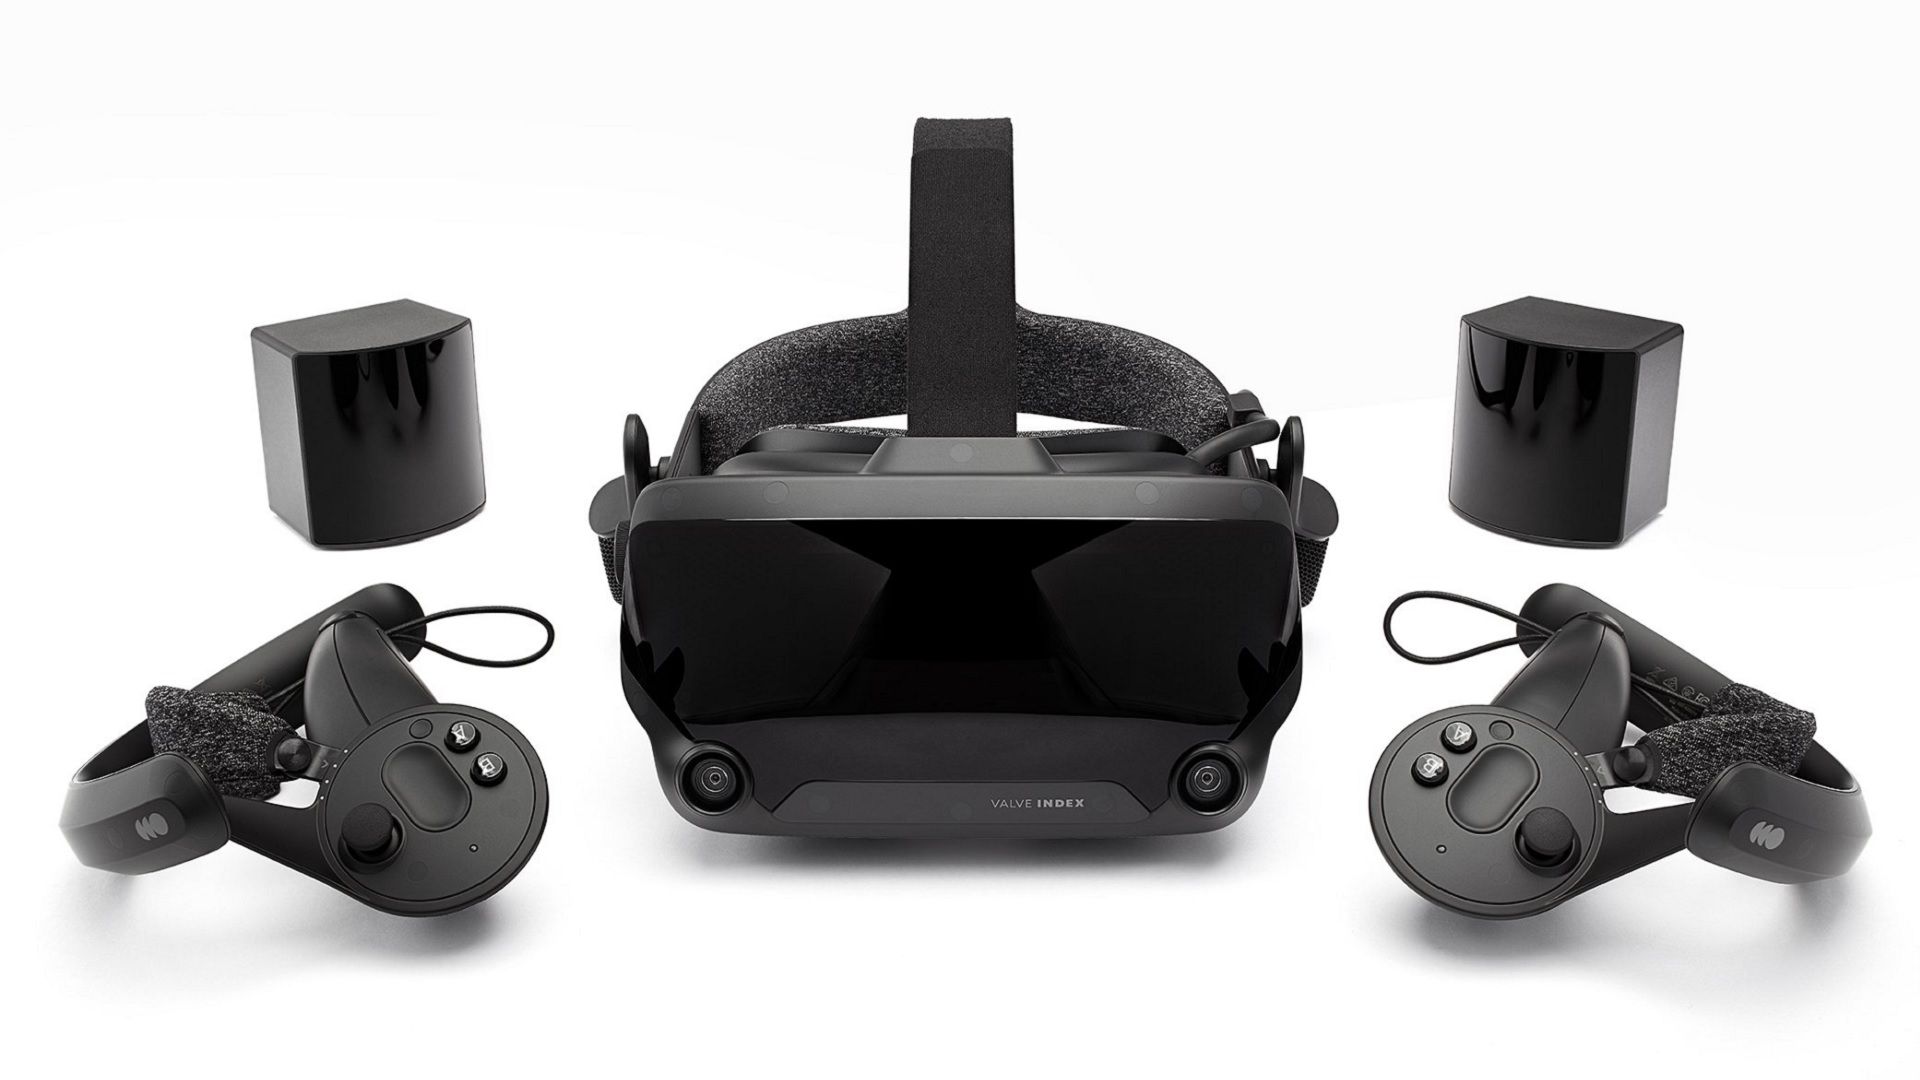 Valve Index VR headset Everything you need to know image 1